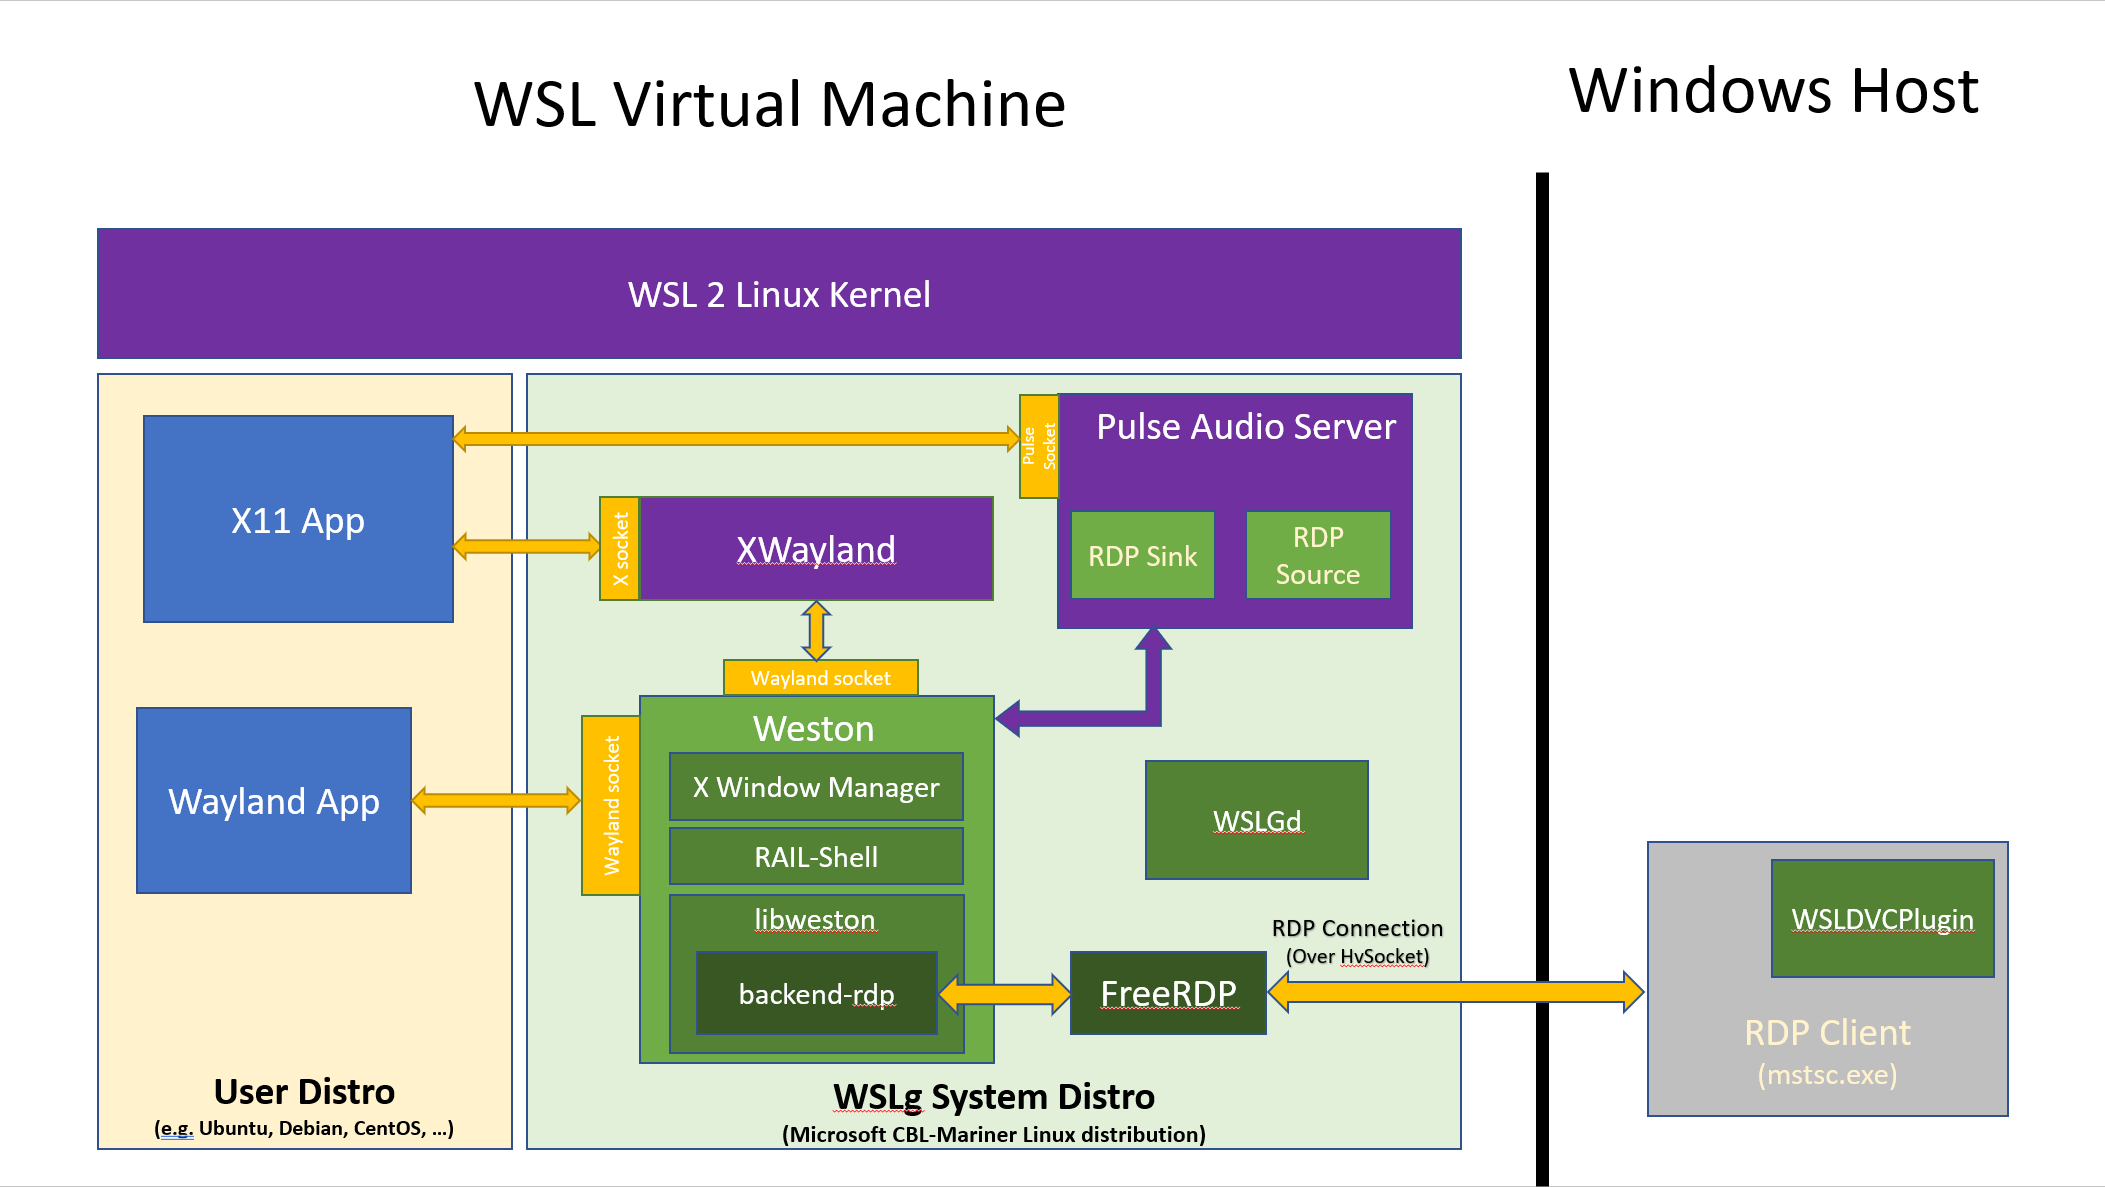 WSLg Architecture Overview